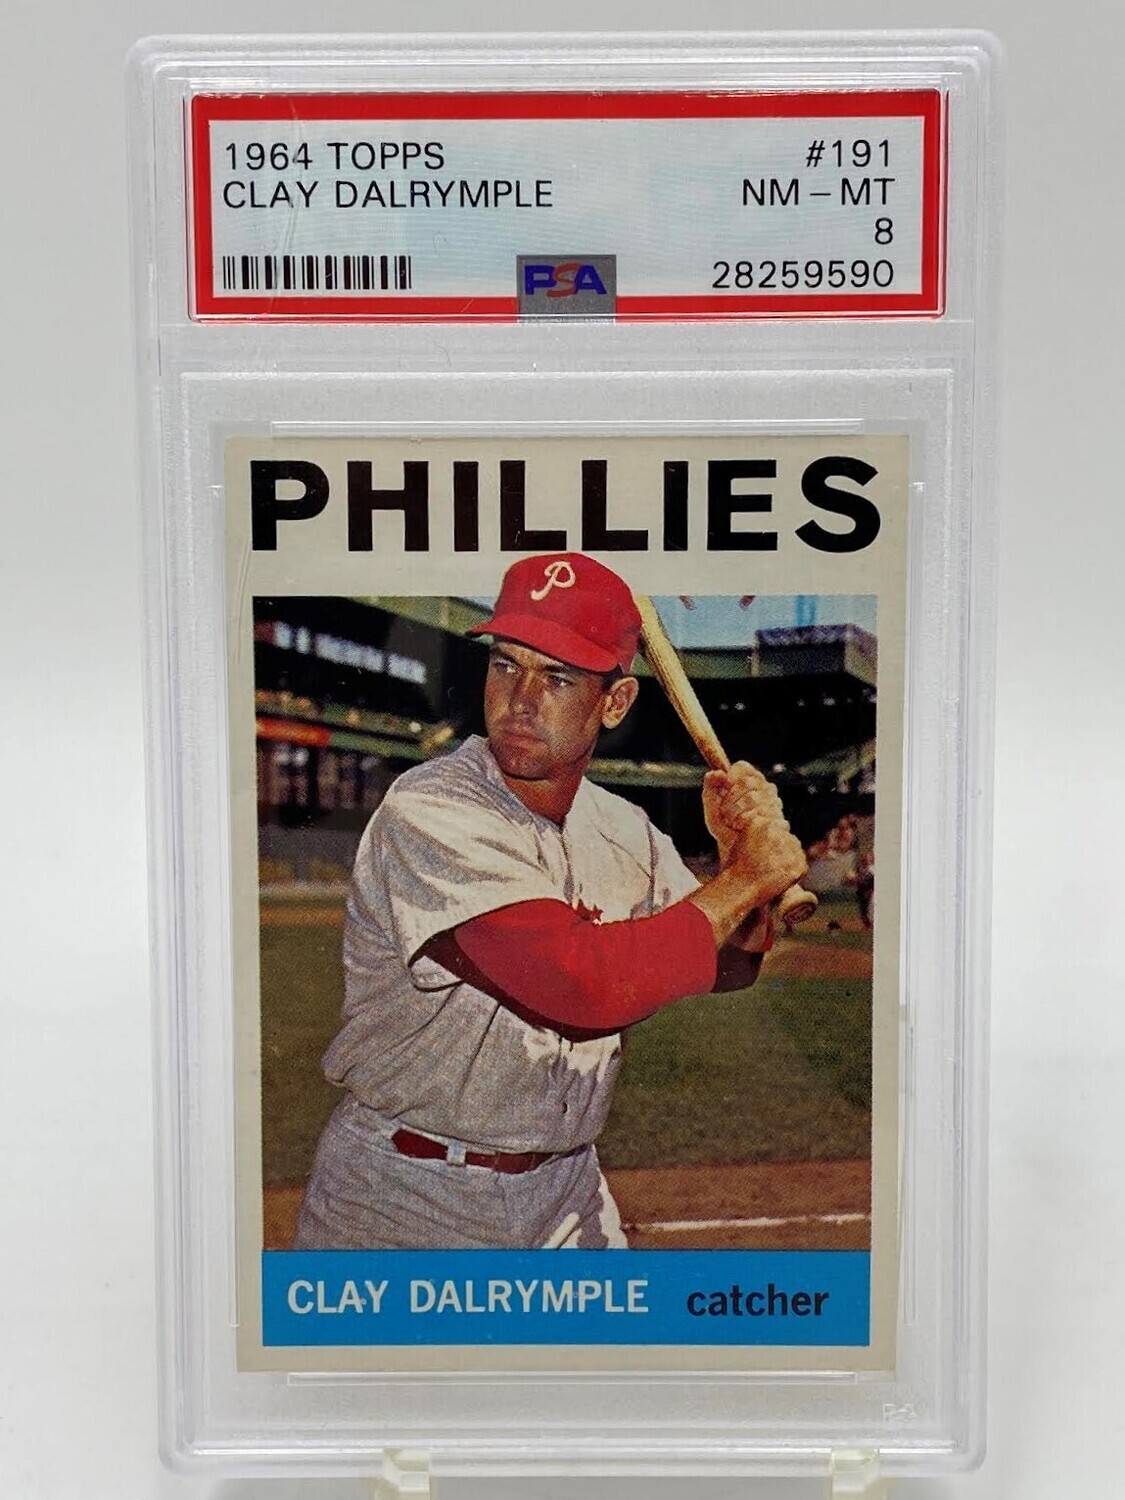 1964 Topps #191 Clay Dalrymple PSA 8 NR-MT